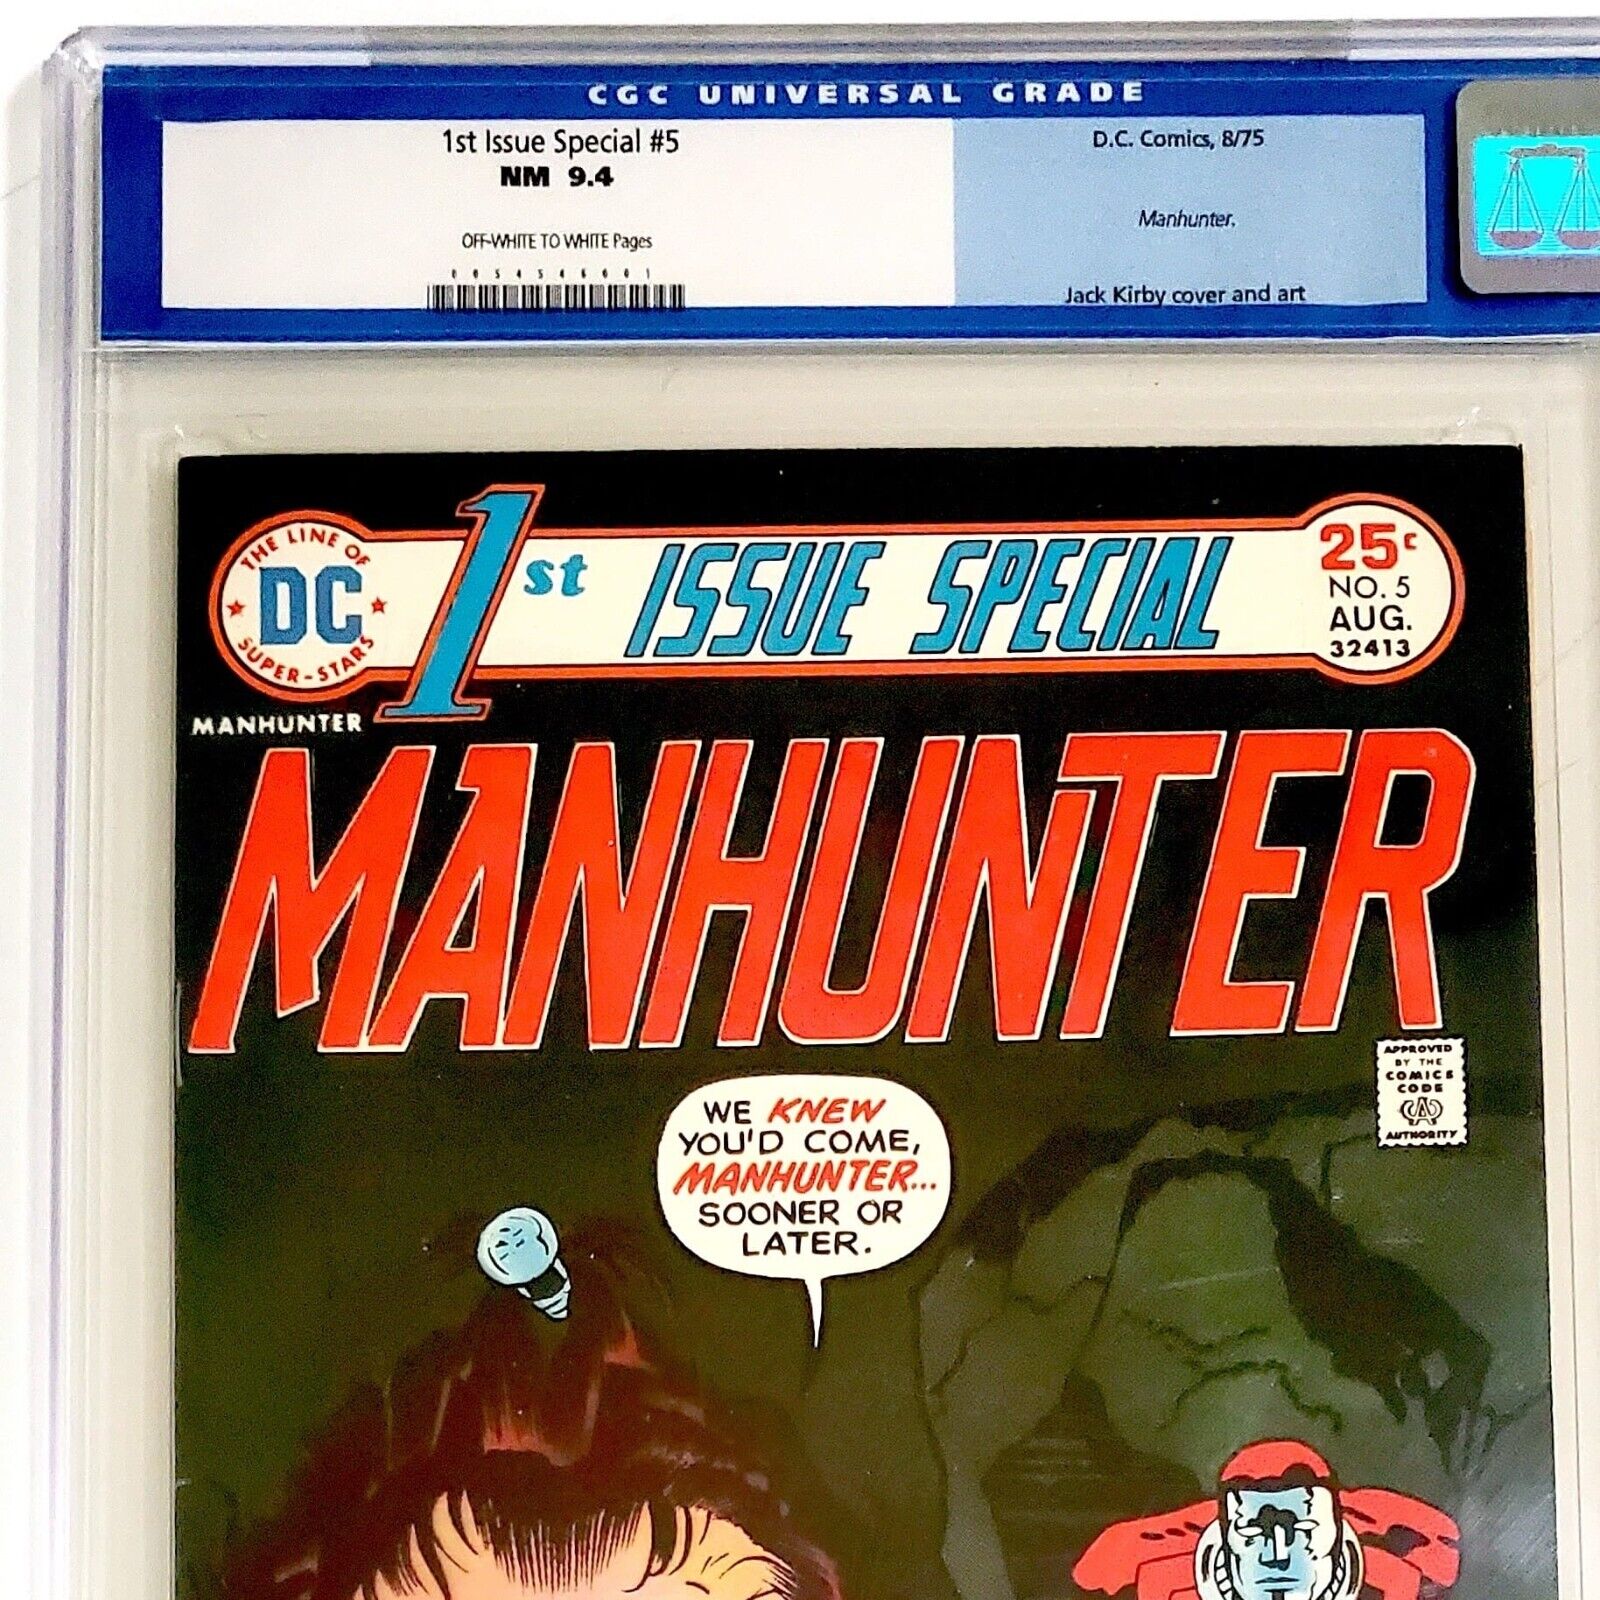 1ST ISSUE SPECIAL #5 CGC 9.4 key 1st Manhunter bronze Kirby low census old label